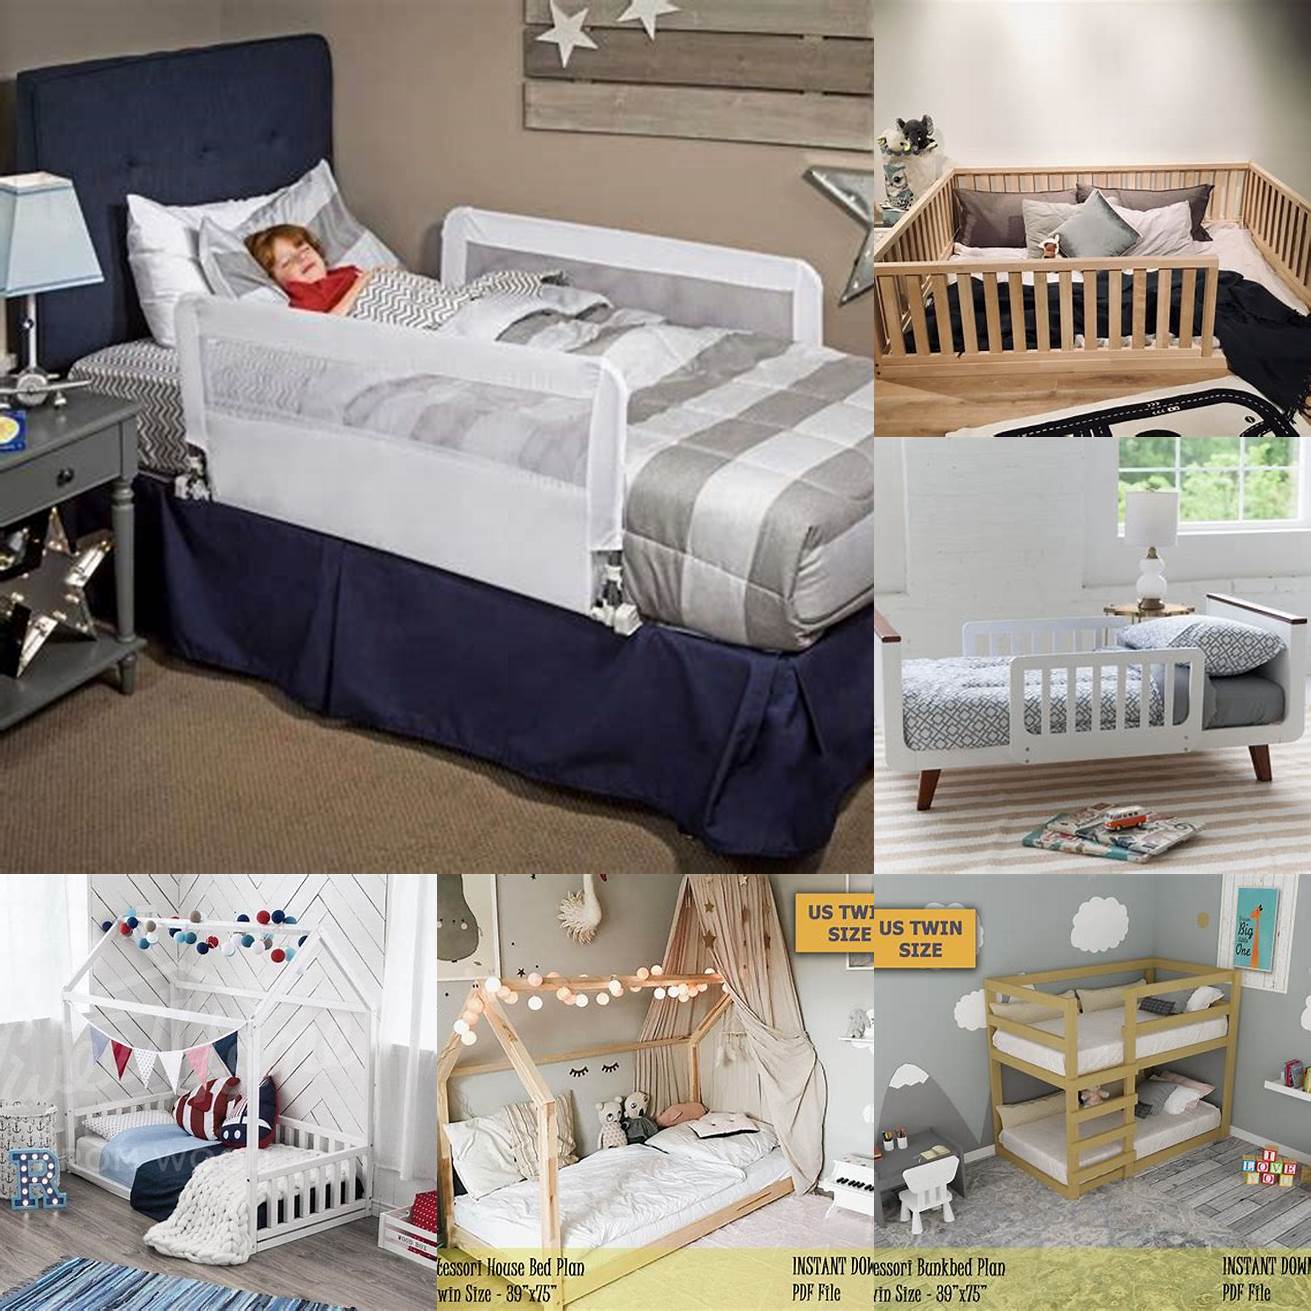 A standard bed frame is perfect for kids who are transitioning from a crib